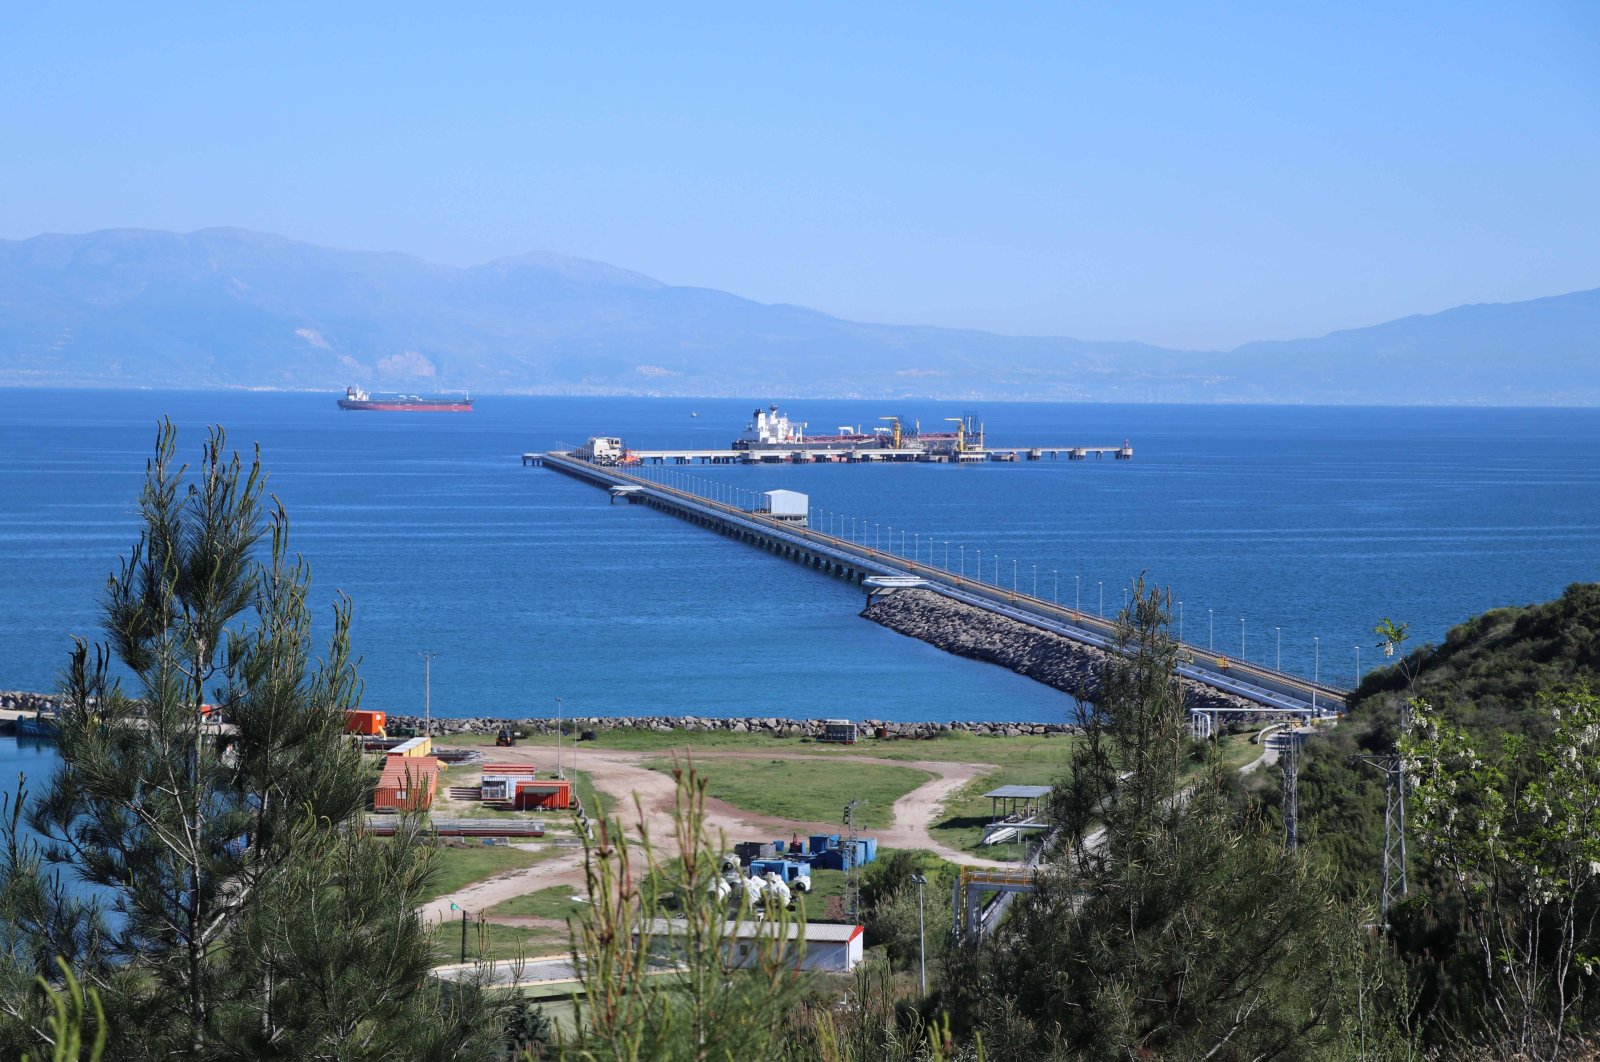 The Haydar Aliyev Marine Terminal, the last stop of the BTC pipeline before crude oil is delivered to global markets, in Adana province, southern Turkey, June 2, 2020. (AA Photo)